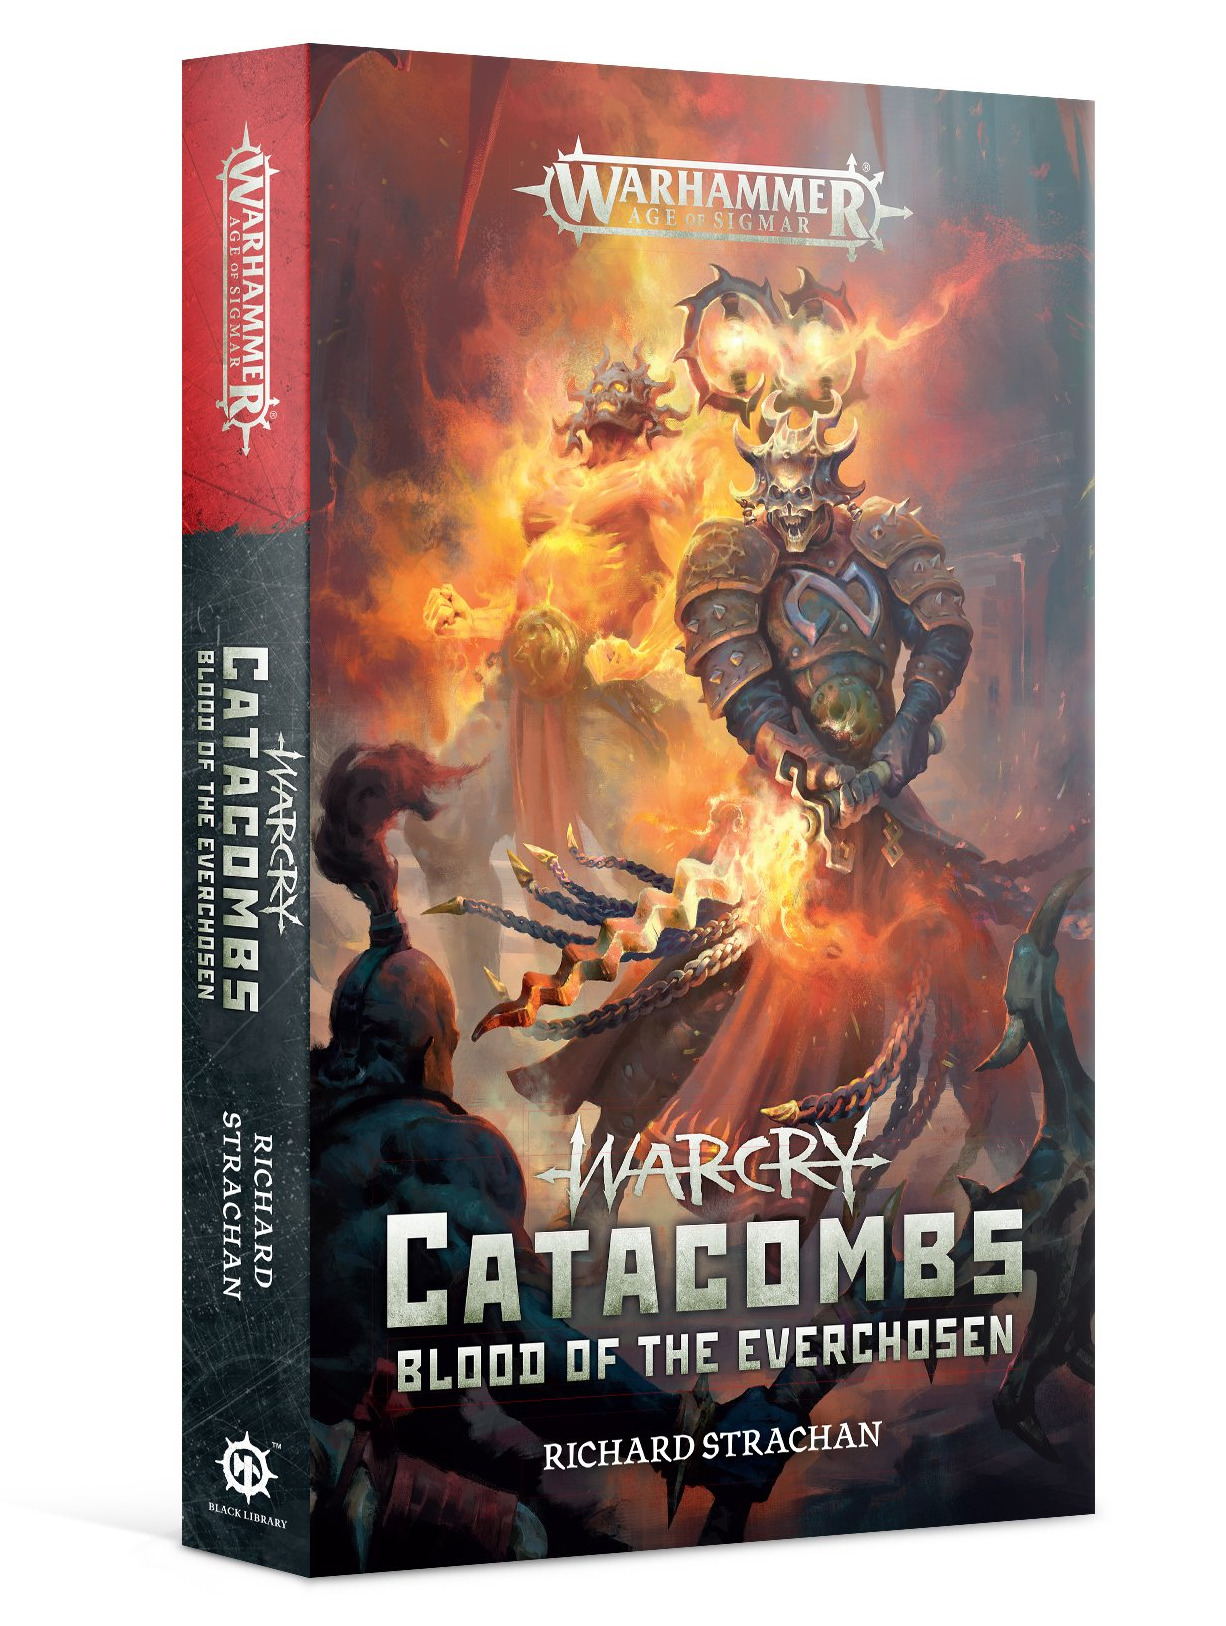 Kniha Warhammer: Age of Sigmar - Warcry Catacombs: Blood of the Everchosen